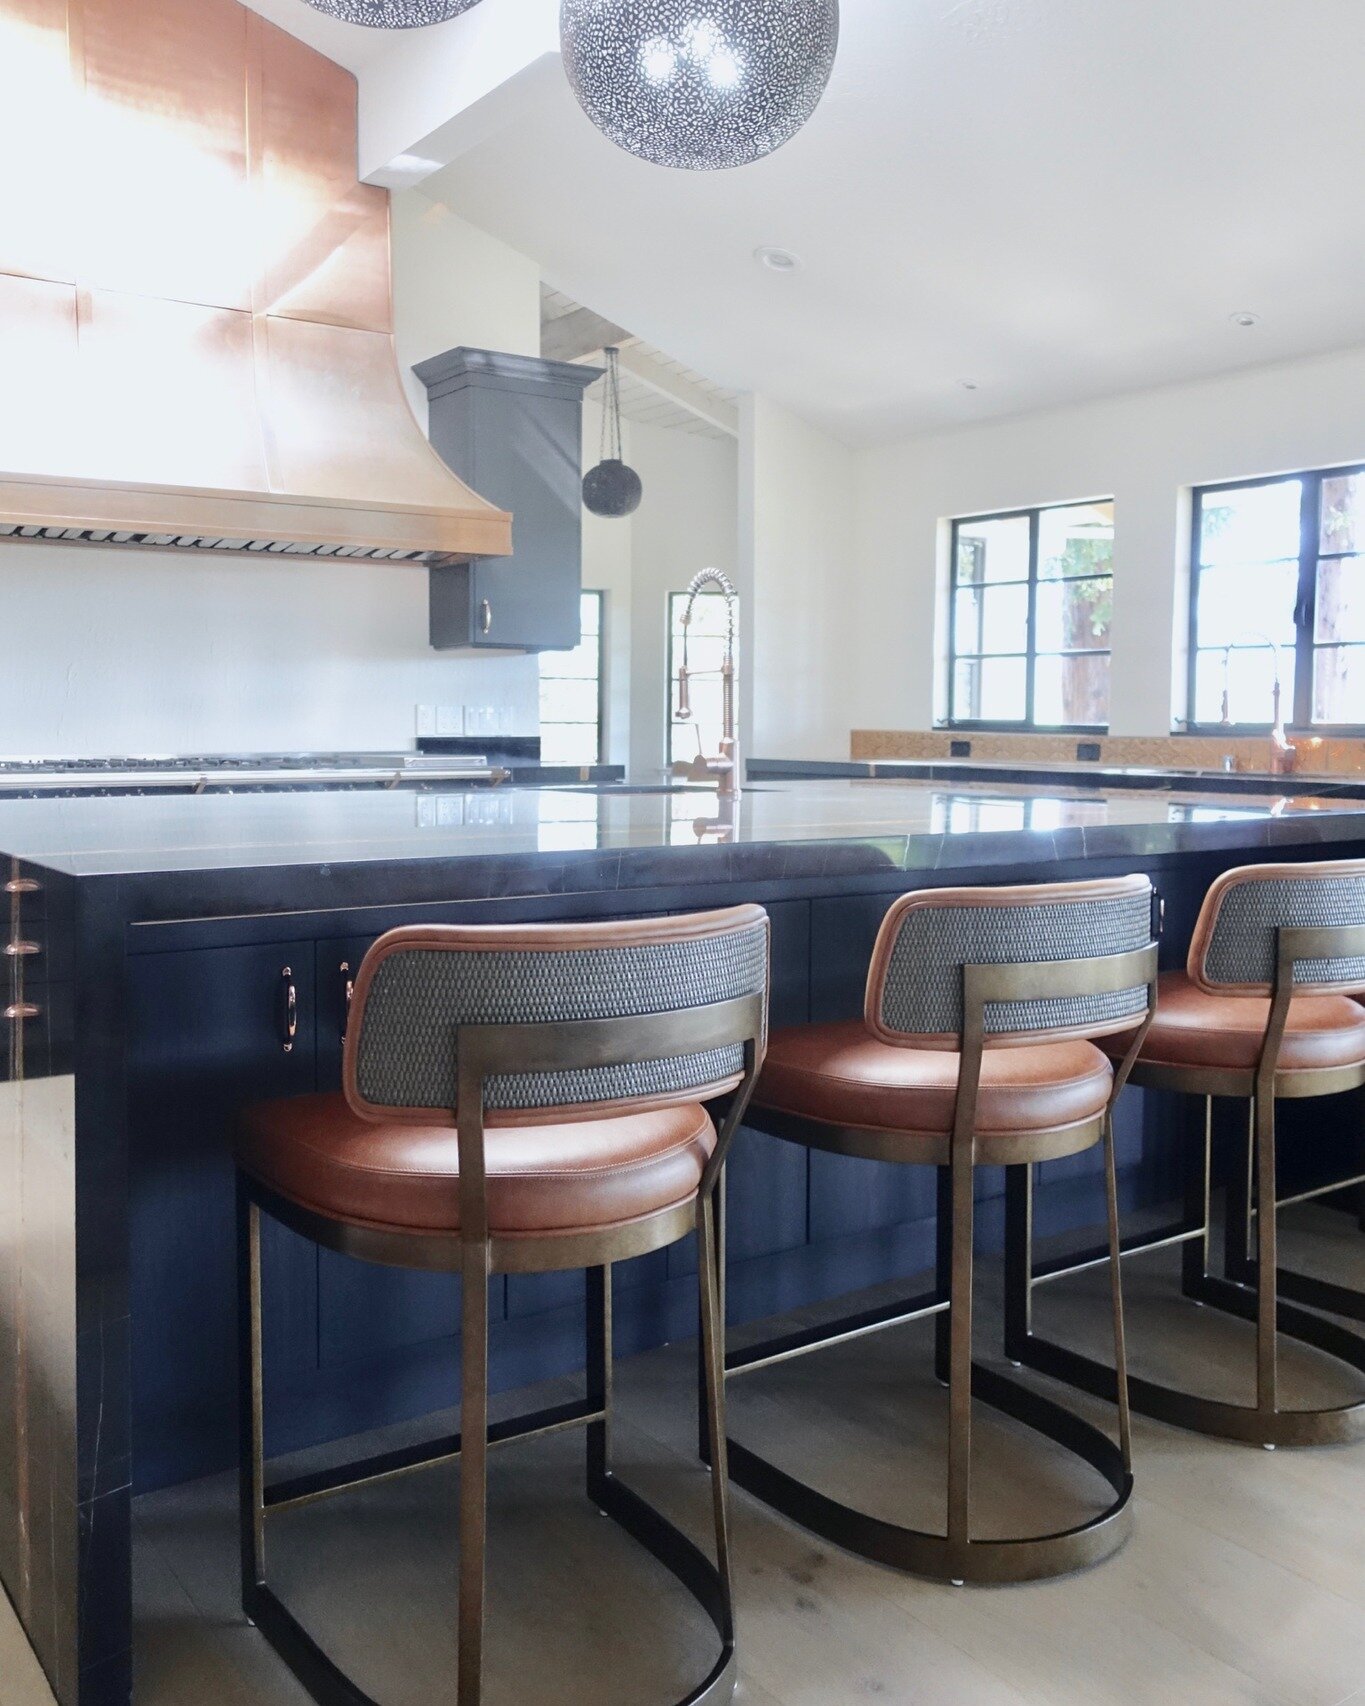 These Palecek counter stools were the perfect fit in our Palo Alto project. The mixed materials complement the eclectic kitchen finishes.

#austininteriordesign #austininteriordesigner #austindesign #atxhome #austinhome #austindesigner #interiordesig